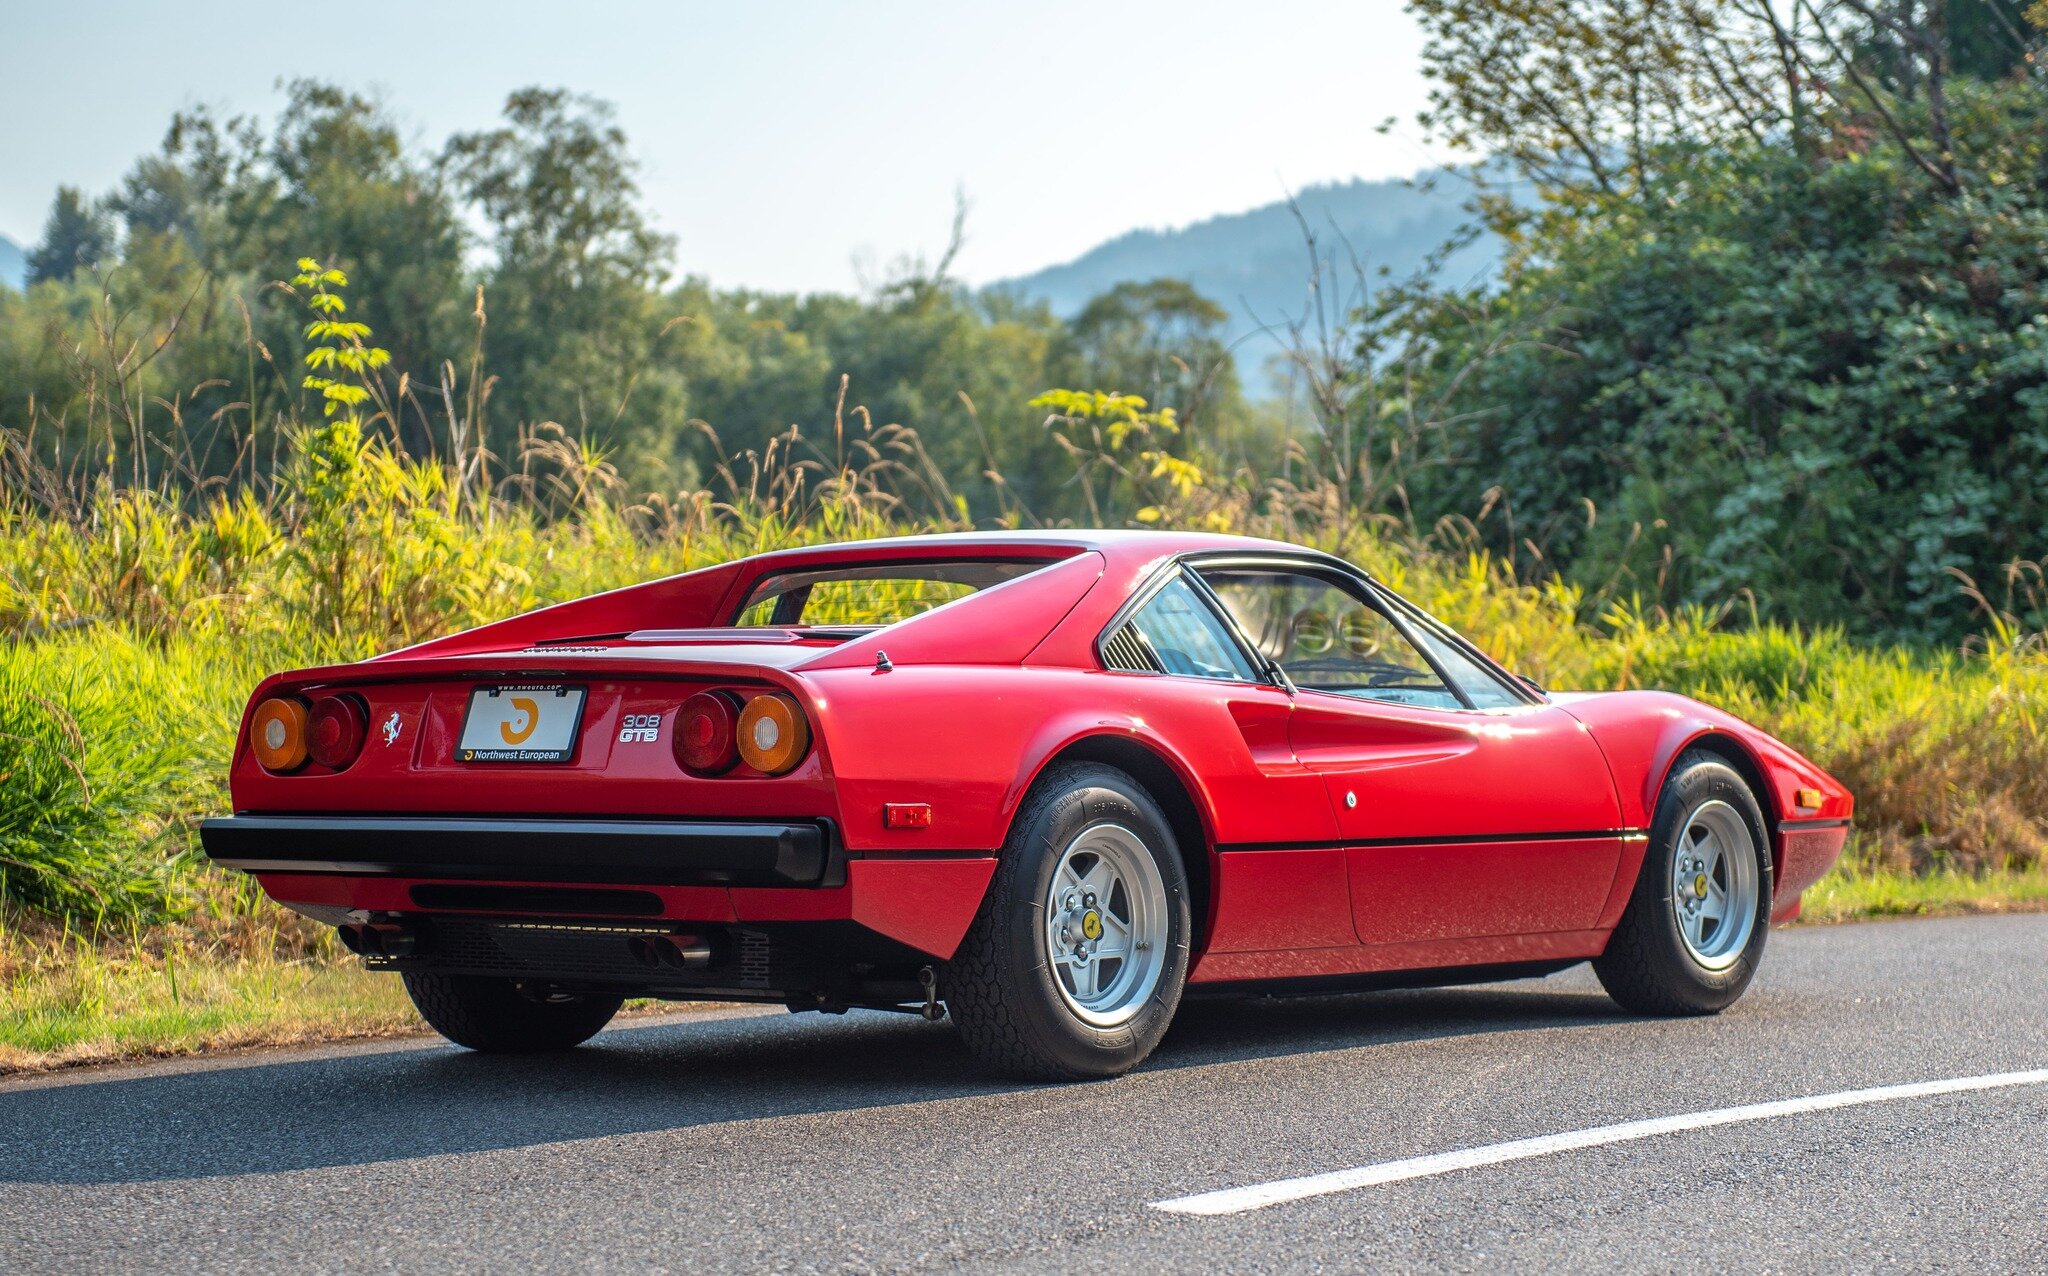 Throwback Thursday -- Several V8 Ferrari conversations this week remind me of a wonderful 308 we sold years ago.  Very original car that was meticulously maintained and enjoyed for decades under single ownership. Wonderful driving experience, and app